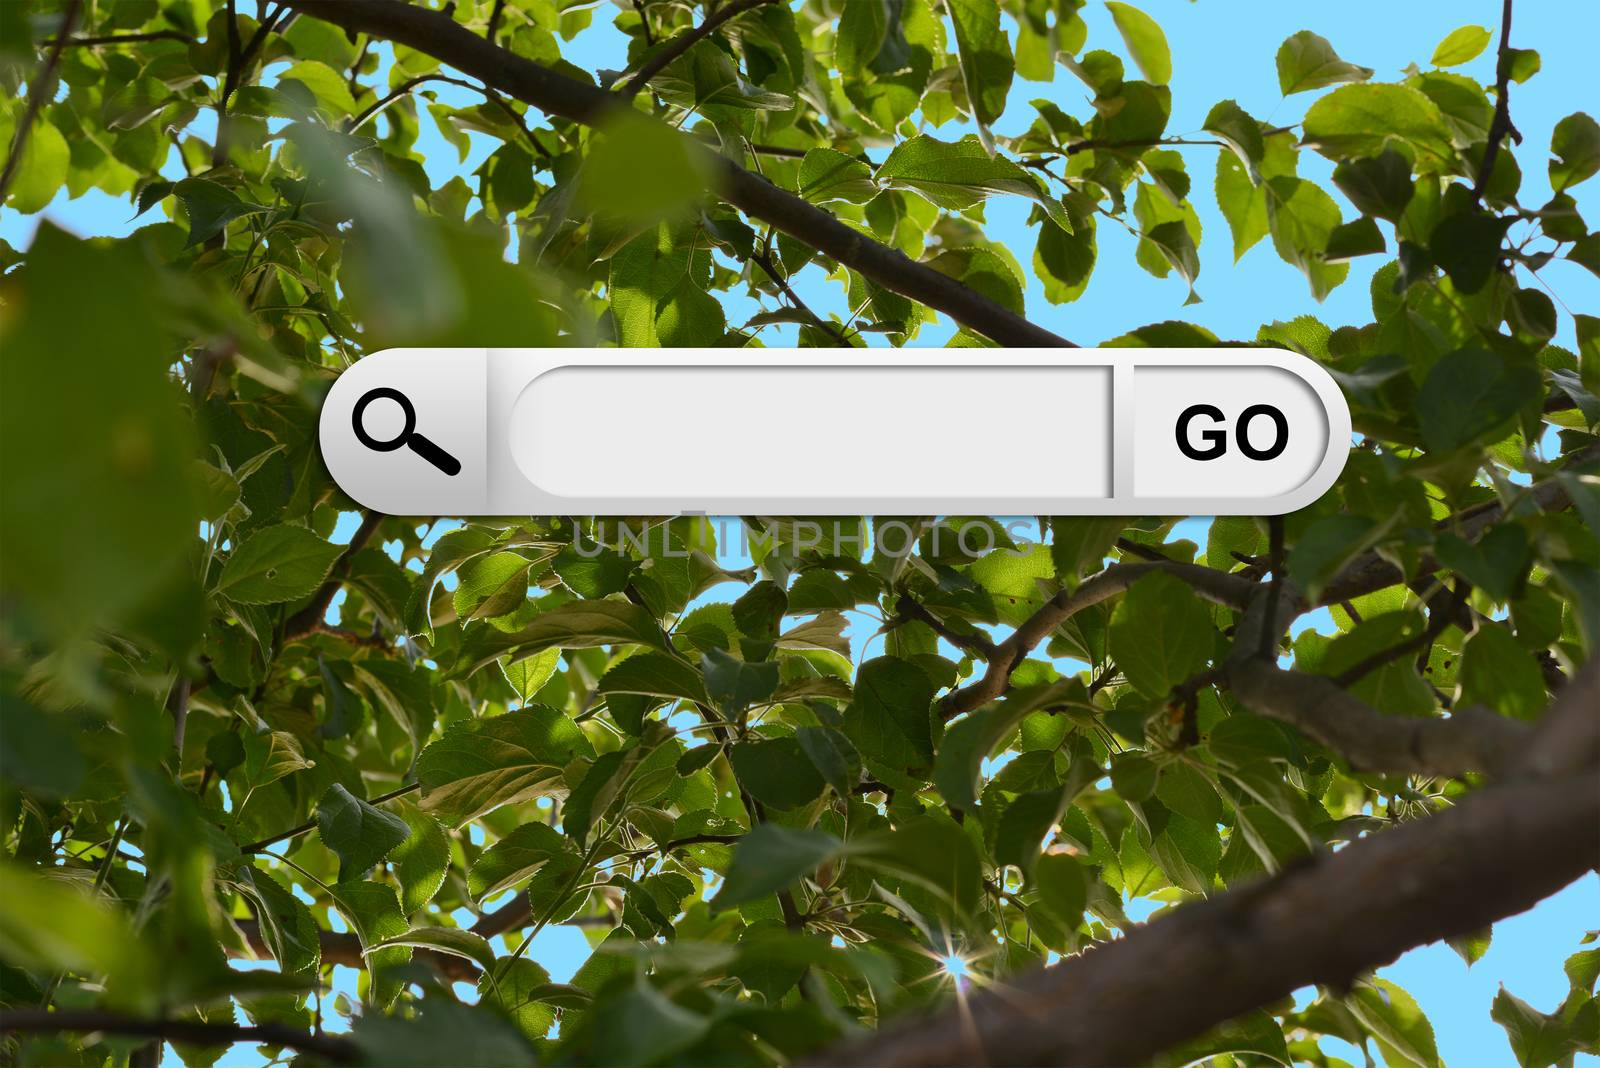 Search bar in browser. Green leaves and brown branches of tree on background